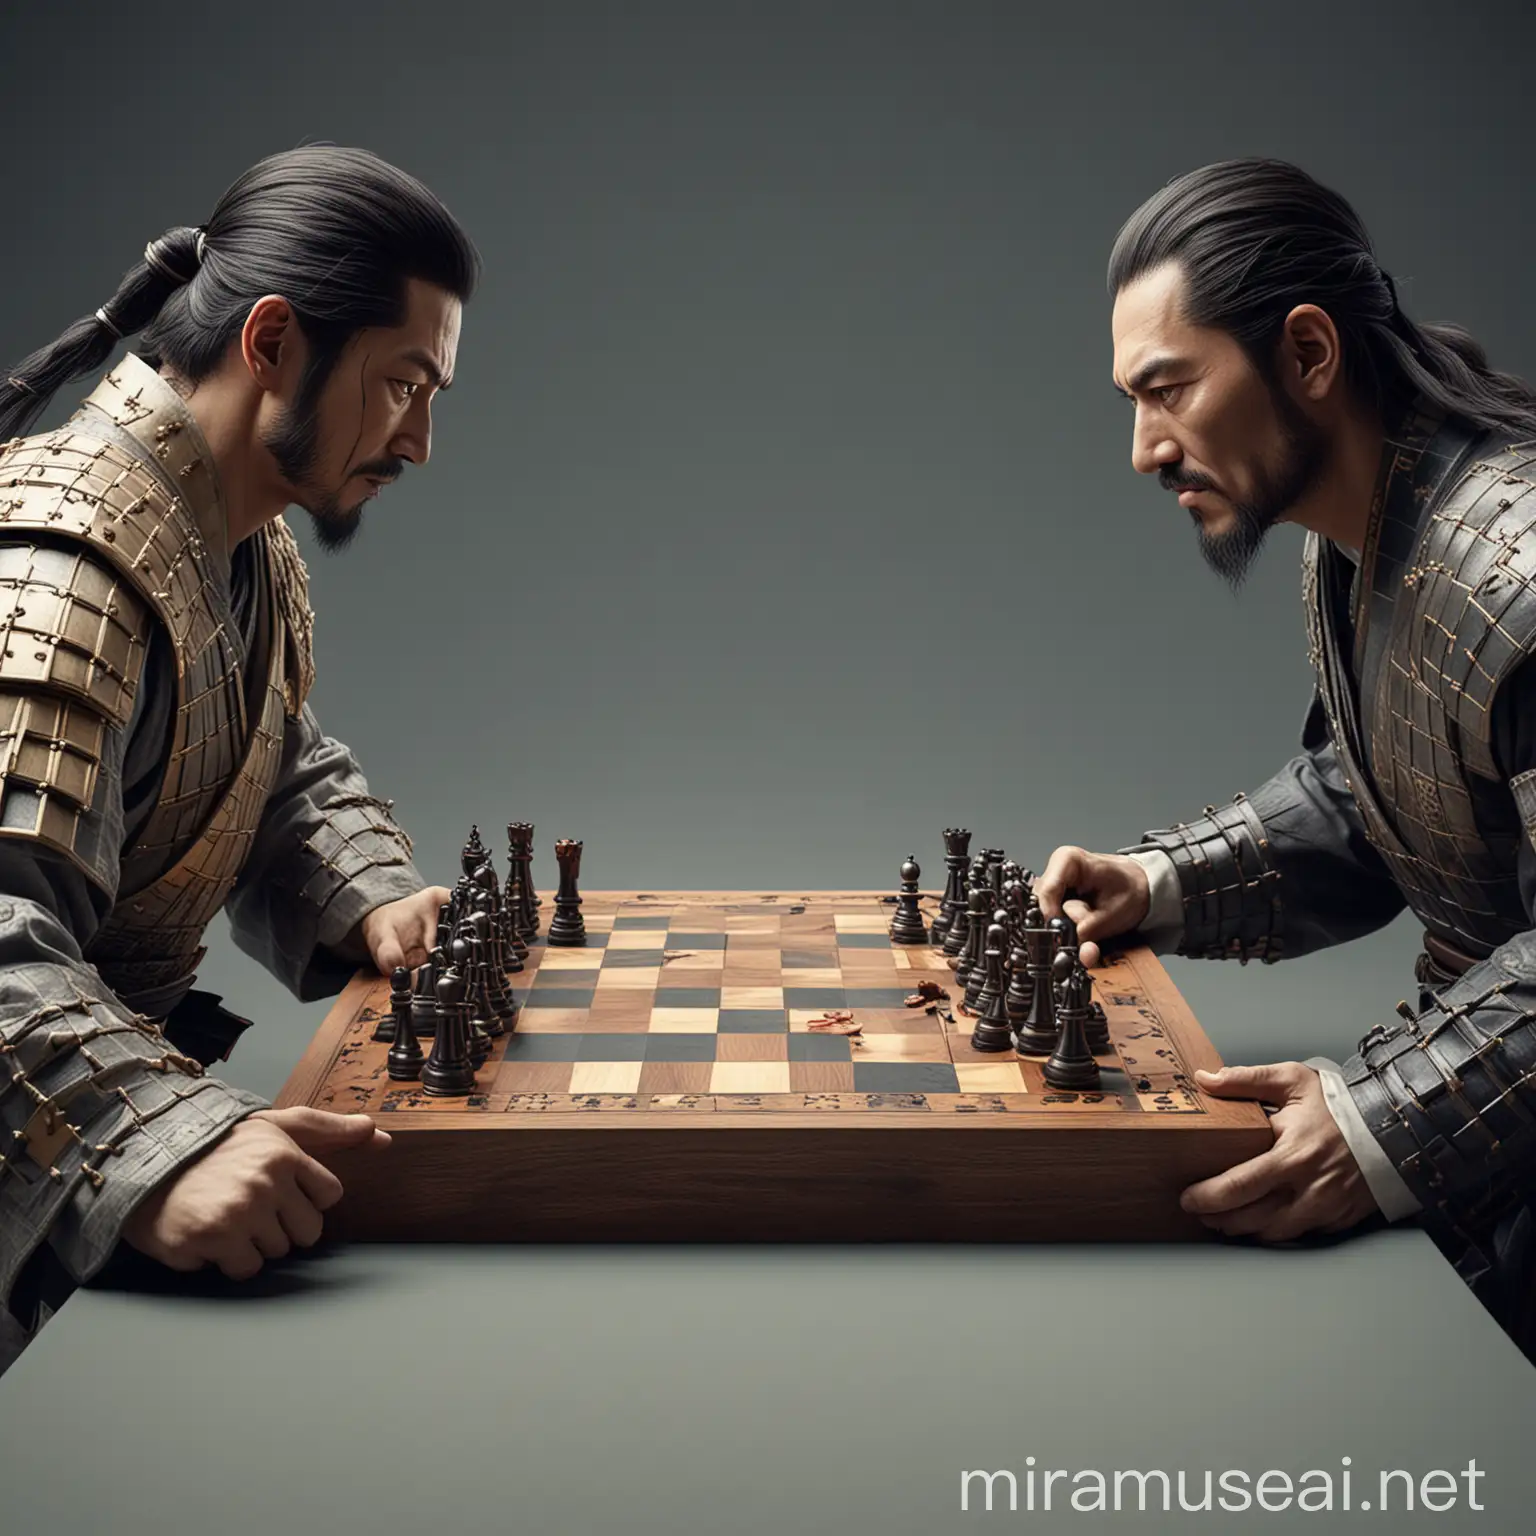 The samurai warrior and corporate businessman facing each other and leaning over a 3D table that resembles a chess board integrated into the battlefield.